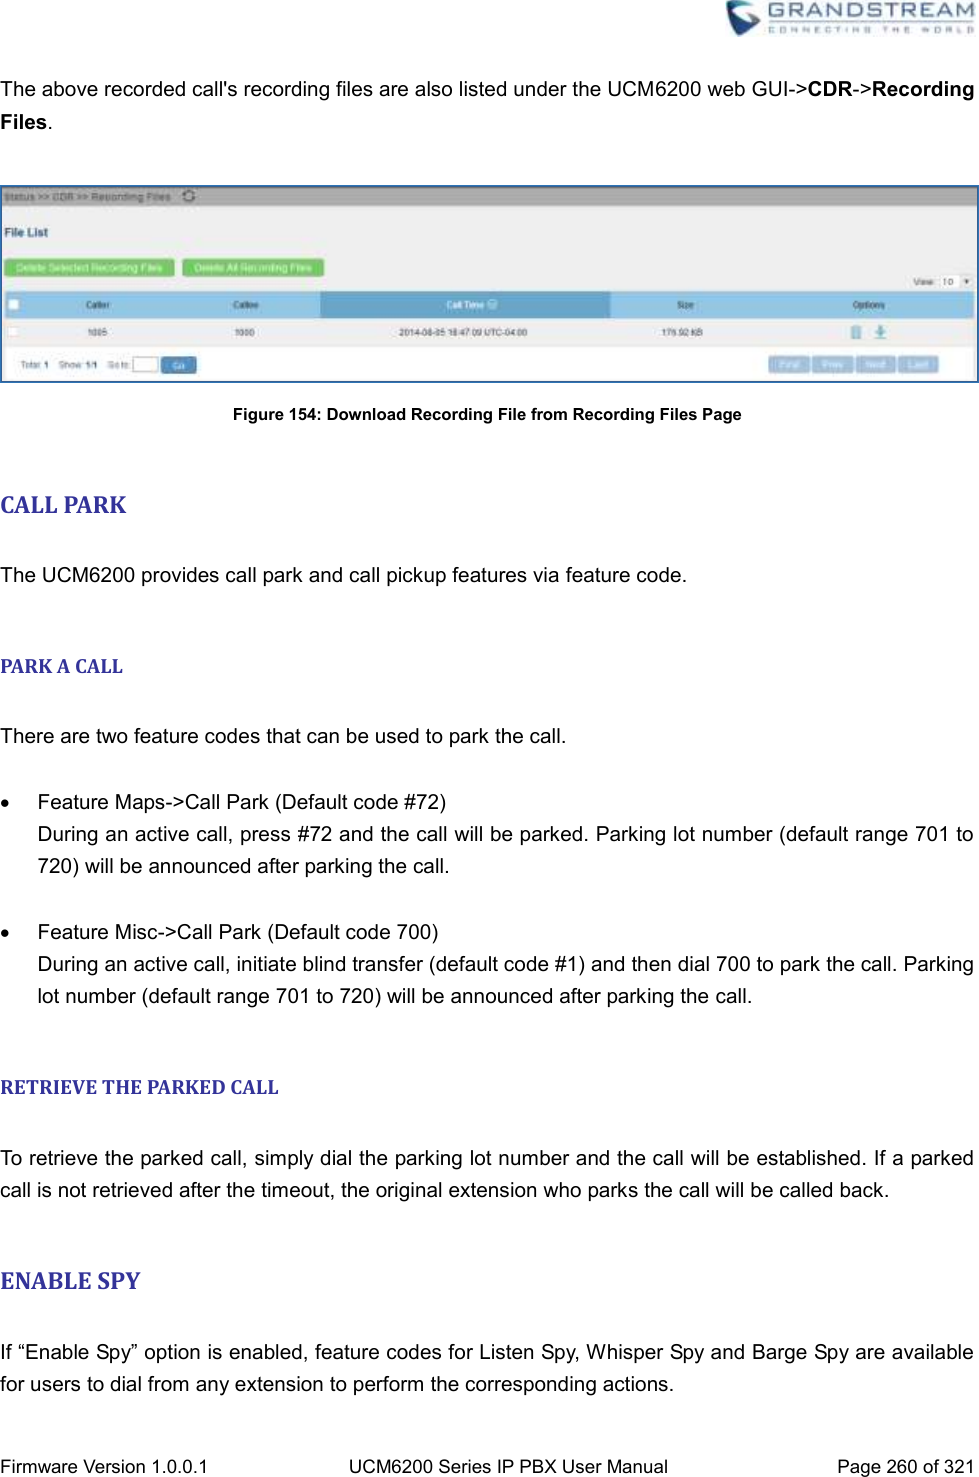  Firmware Version 1.0.0.1 UCM6200 Series IP PBX User Manual Page 260 of 321    The above recorded call&apos;s recording files are also listed under the UCM6200 web GUI-&gt;CDR-&gt;Recording Files.   Figure 154: Download Recording File from Recording Files Page  CALL PARK  The UCM6200 provides call park and call pickup features via feature code.  PARK A CALL  There are two feature codes that can be used to park the call.    Feature Maps-&gt;Call Park (Default code #72) During an active call, press #72 and the call will be parked. Parking lot number (default range 701 to 720) will be announced after parking the call.    Feature Misc-&gt;Call Park (Default code 700) During an active call, initiate blind transfer (default code #1) and then dial 700 to park the call. Parking lot number (default range 701 to 720) will be announced after parking the call.  RETRIEVE THE PARKED CALL  To retrieve the parked call, simply dial the parking lot number and the call will be established. If a parked call is not retrieved after the timeout, the original extension who parks the call will be called back.  ENABLE SPY  If “Enable Spy” option is enabled, feature codes for Listen Spy, Whisper Spy and Barge Spy are available for users to dial from any extension to perform the corresponding actions. 